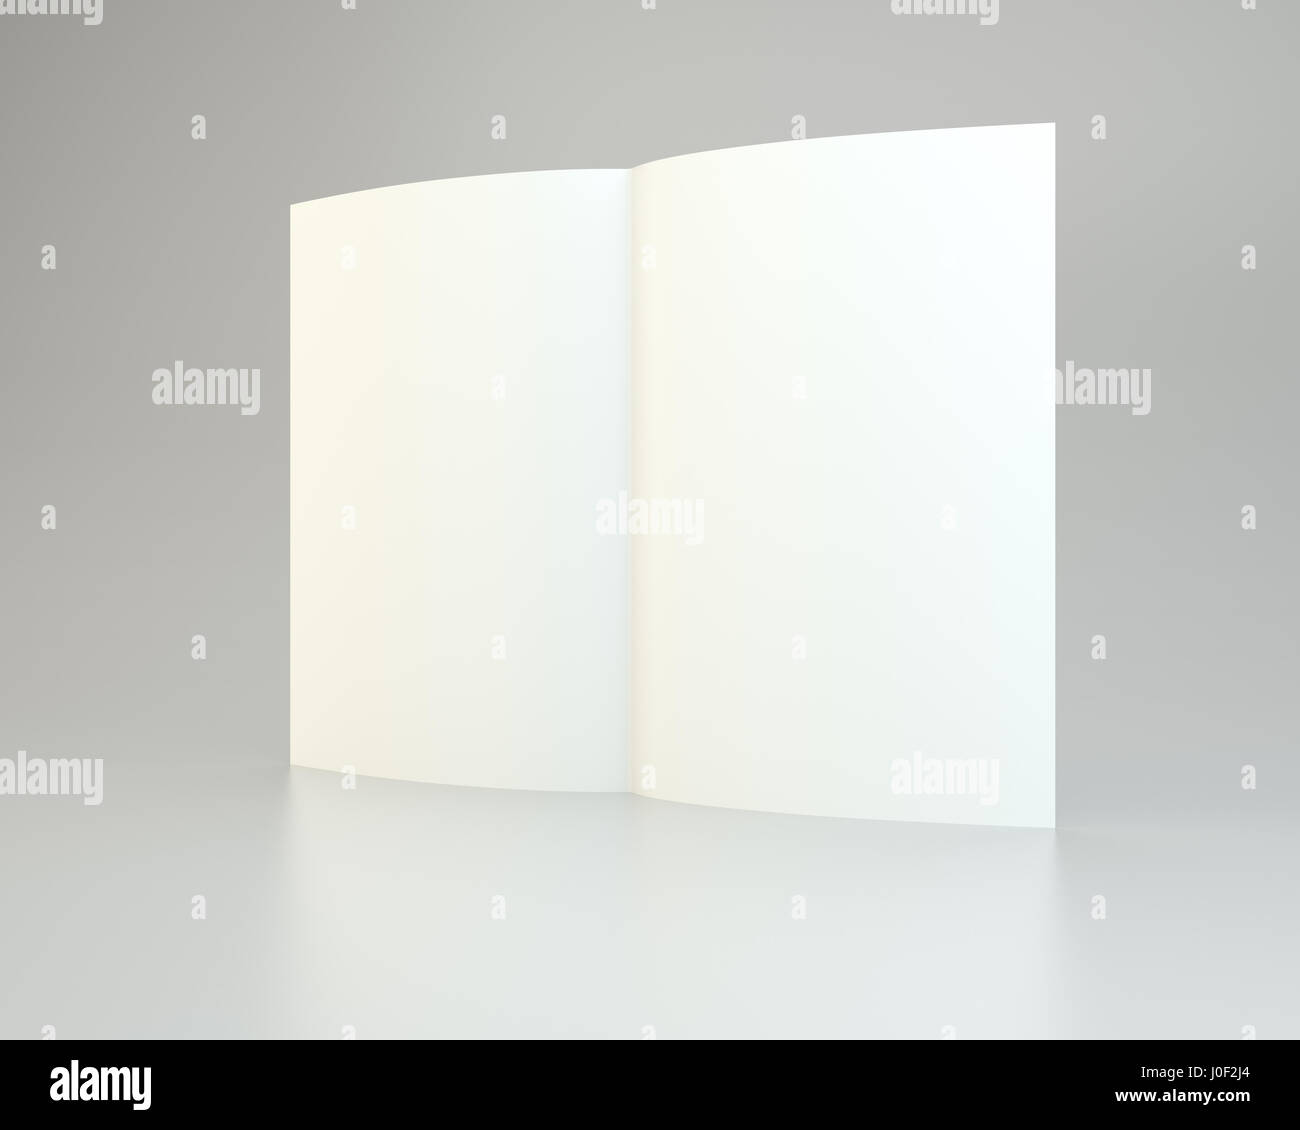 Blank White A4 paper sheet mockup template Stock Photo